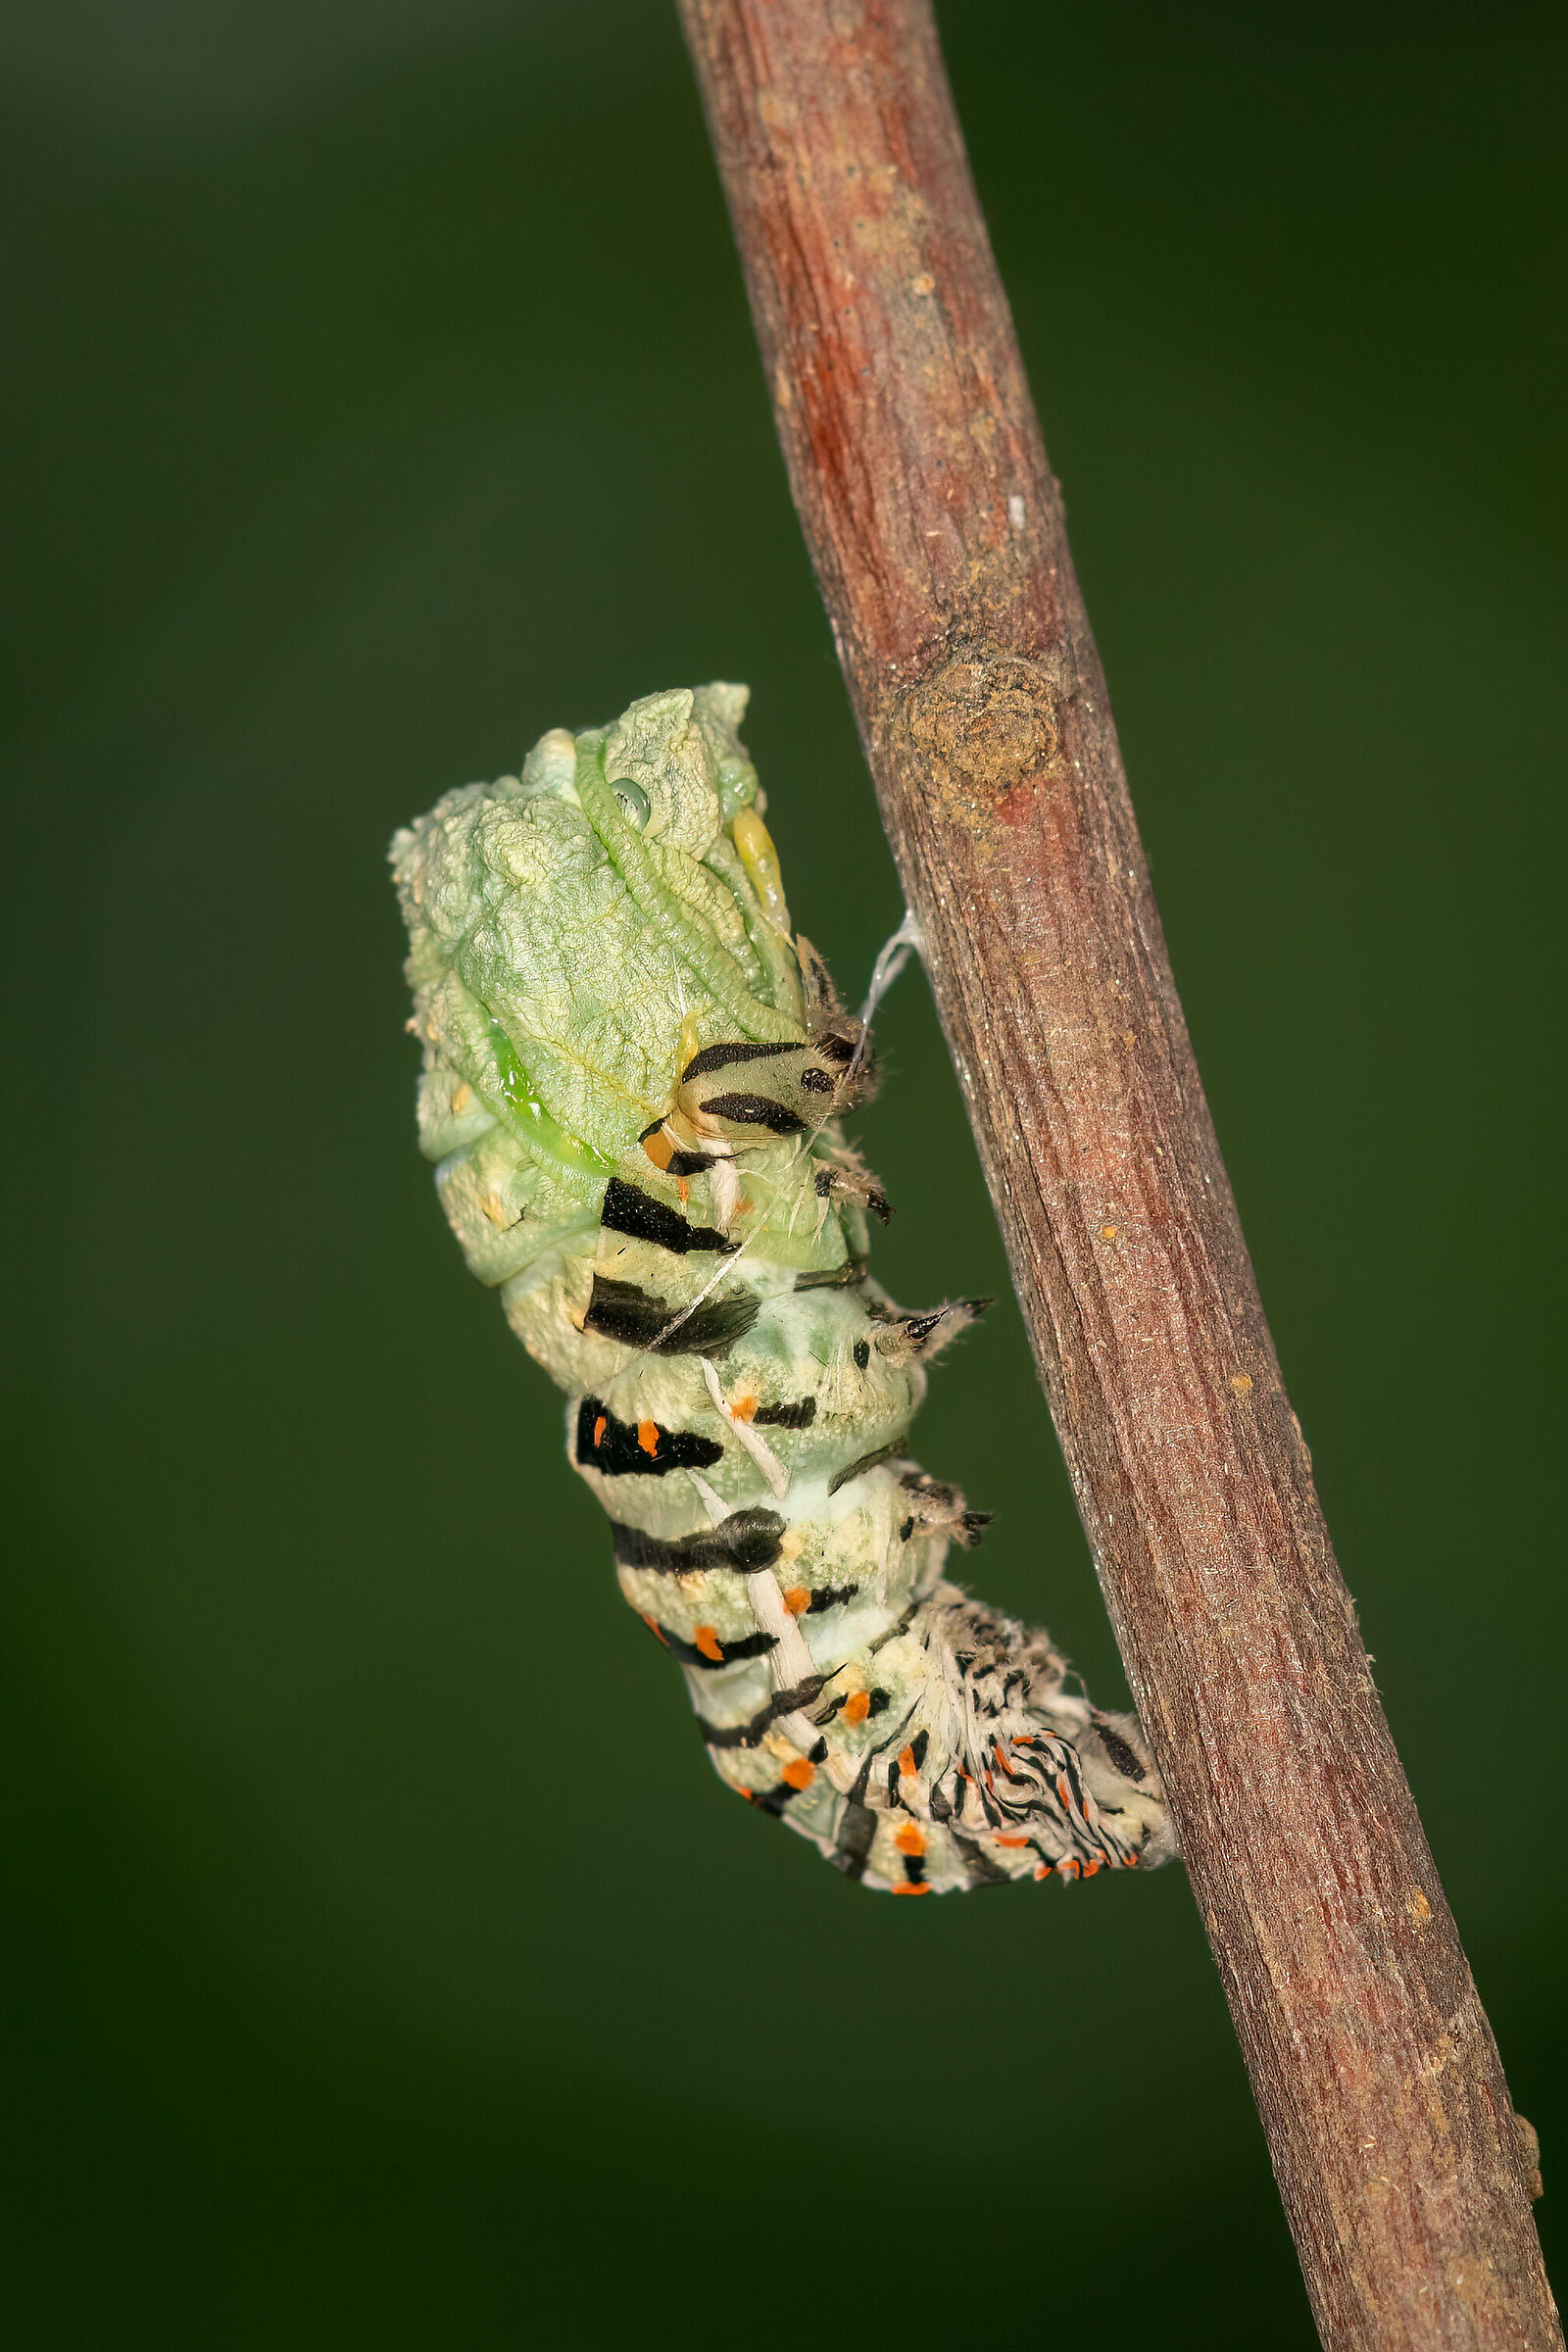 The last molt of the swallowtail: contractions...